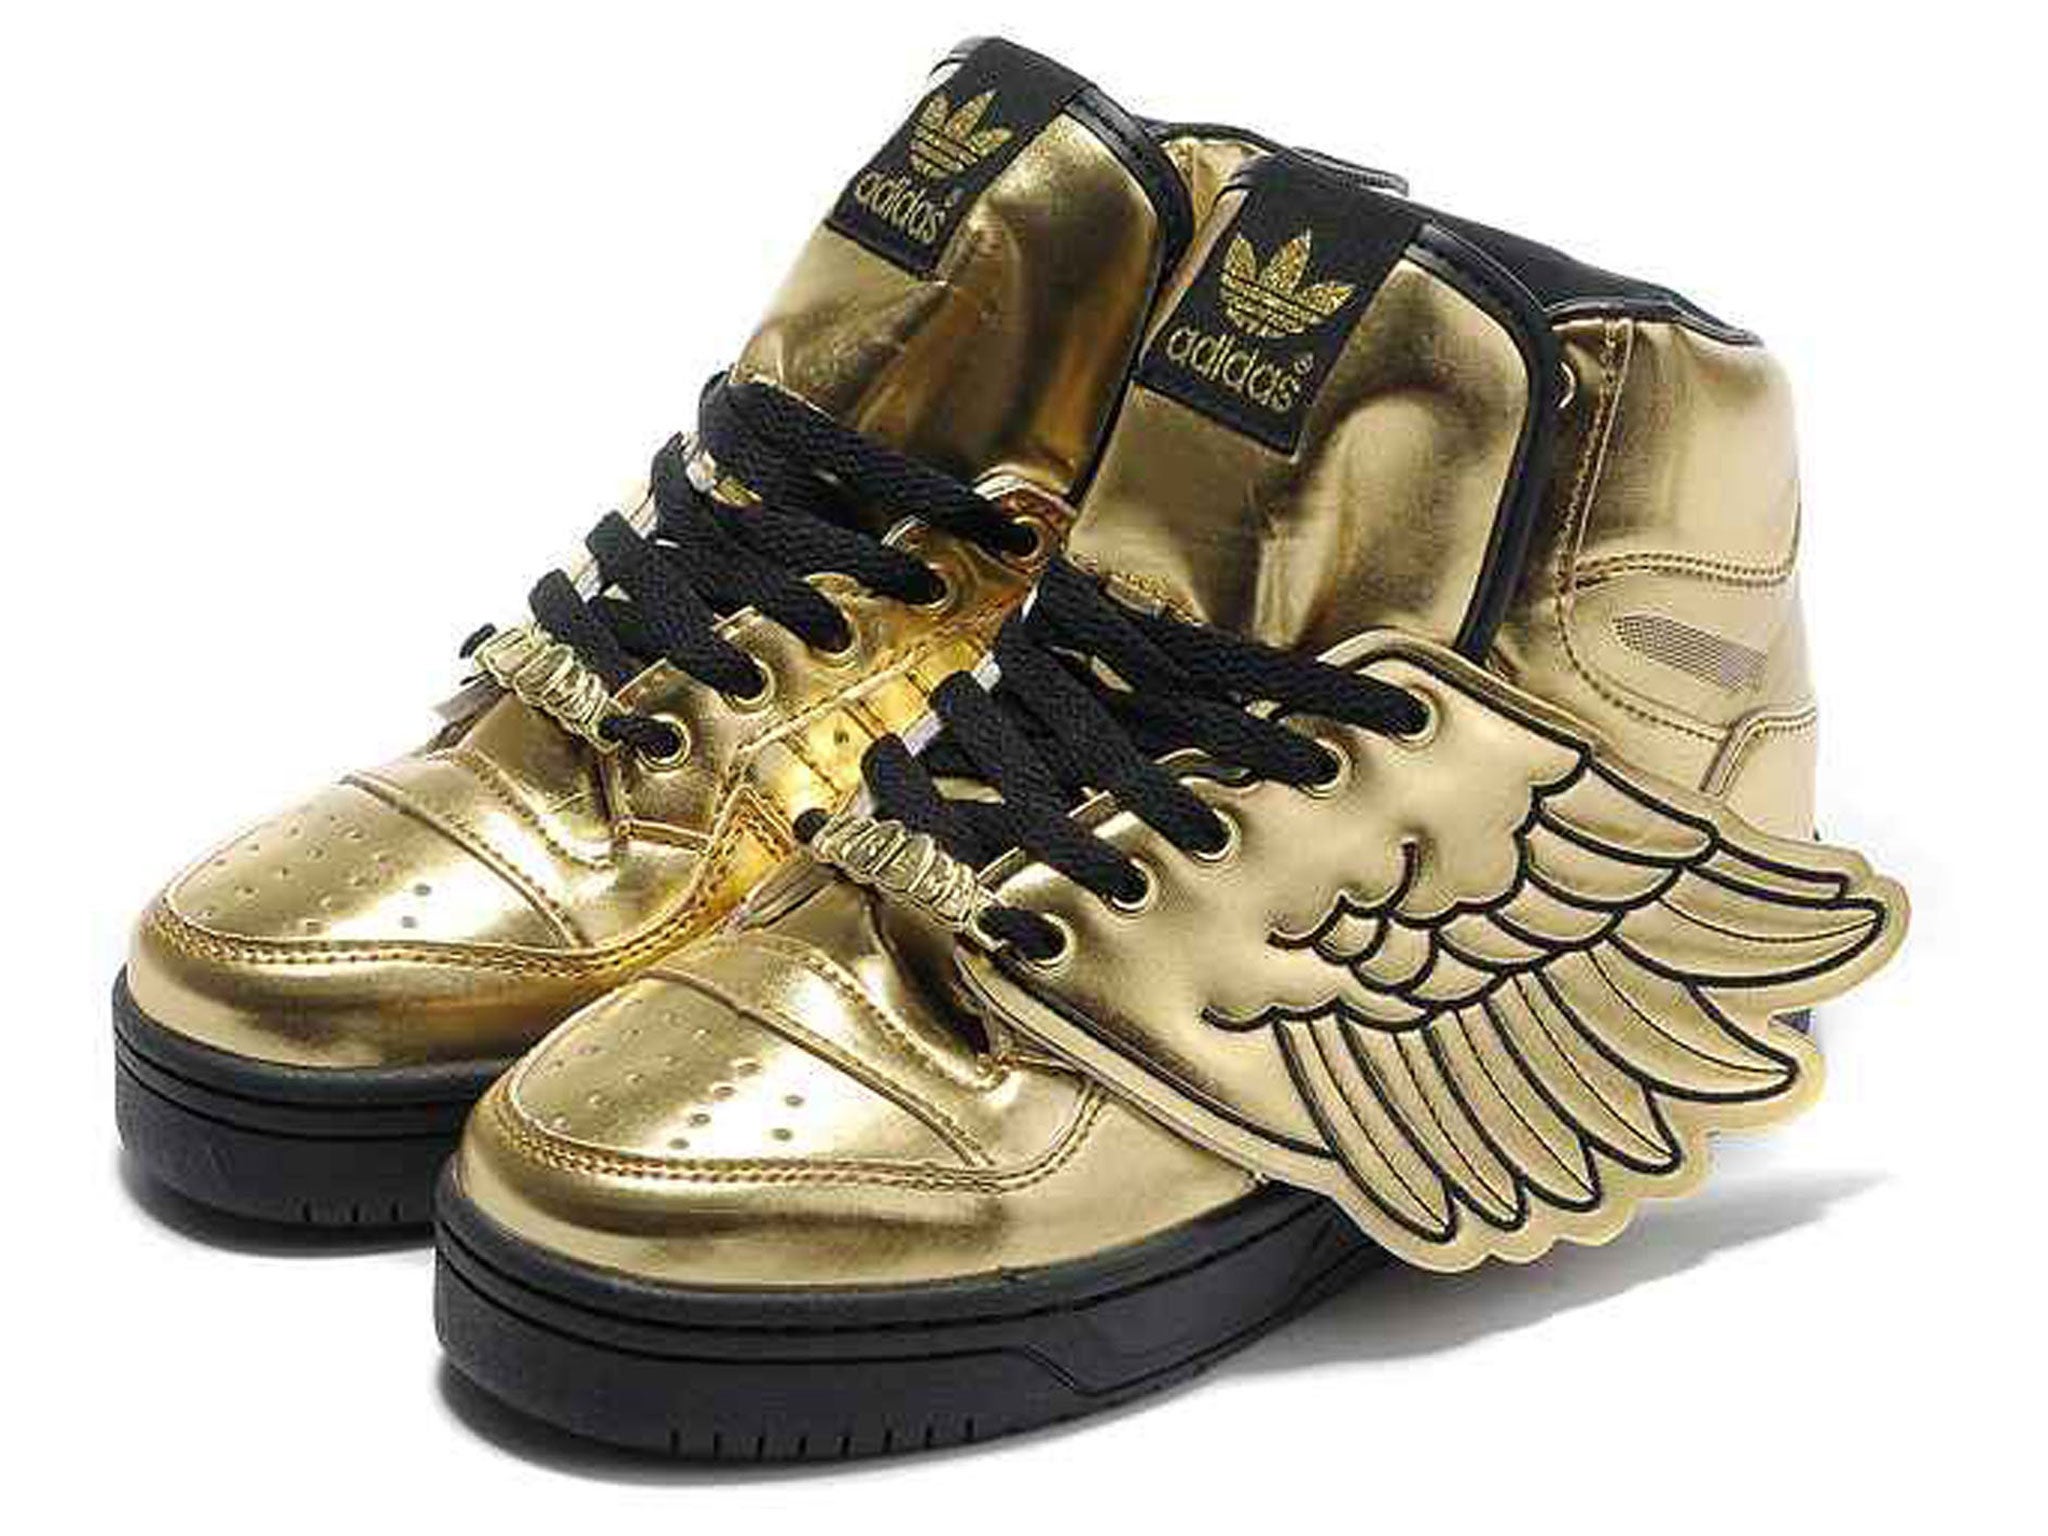 Adidas trainers go Schwing: Oh, for the wings, for the wings of a shoe ...